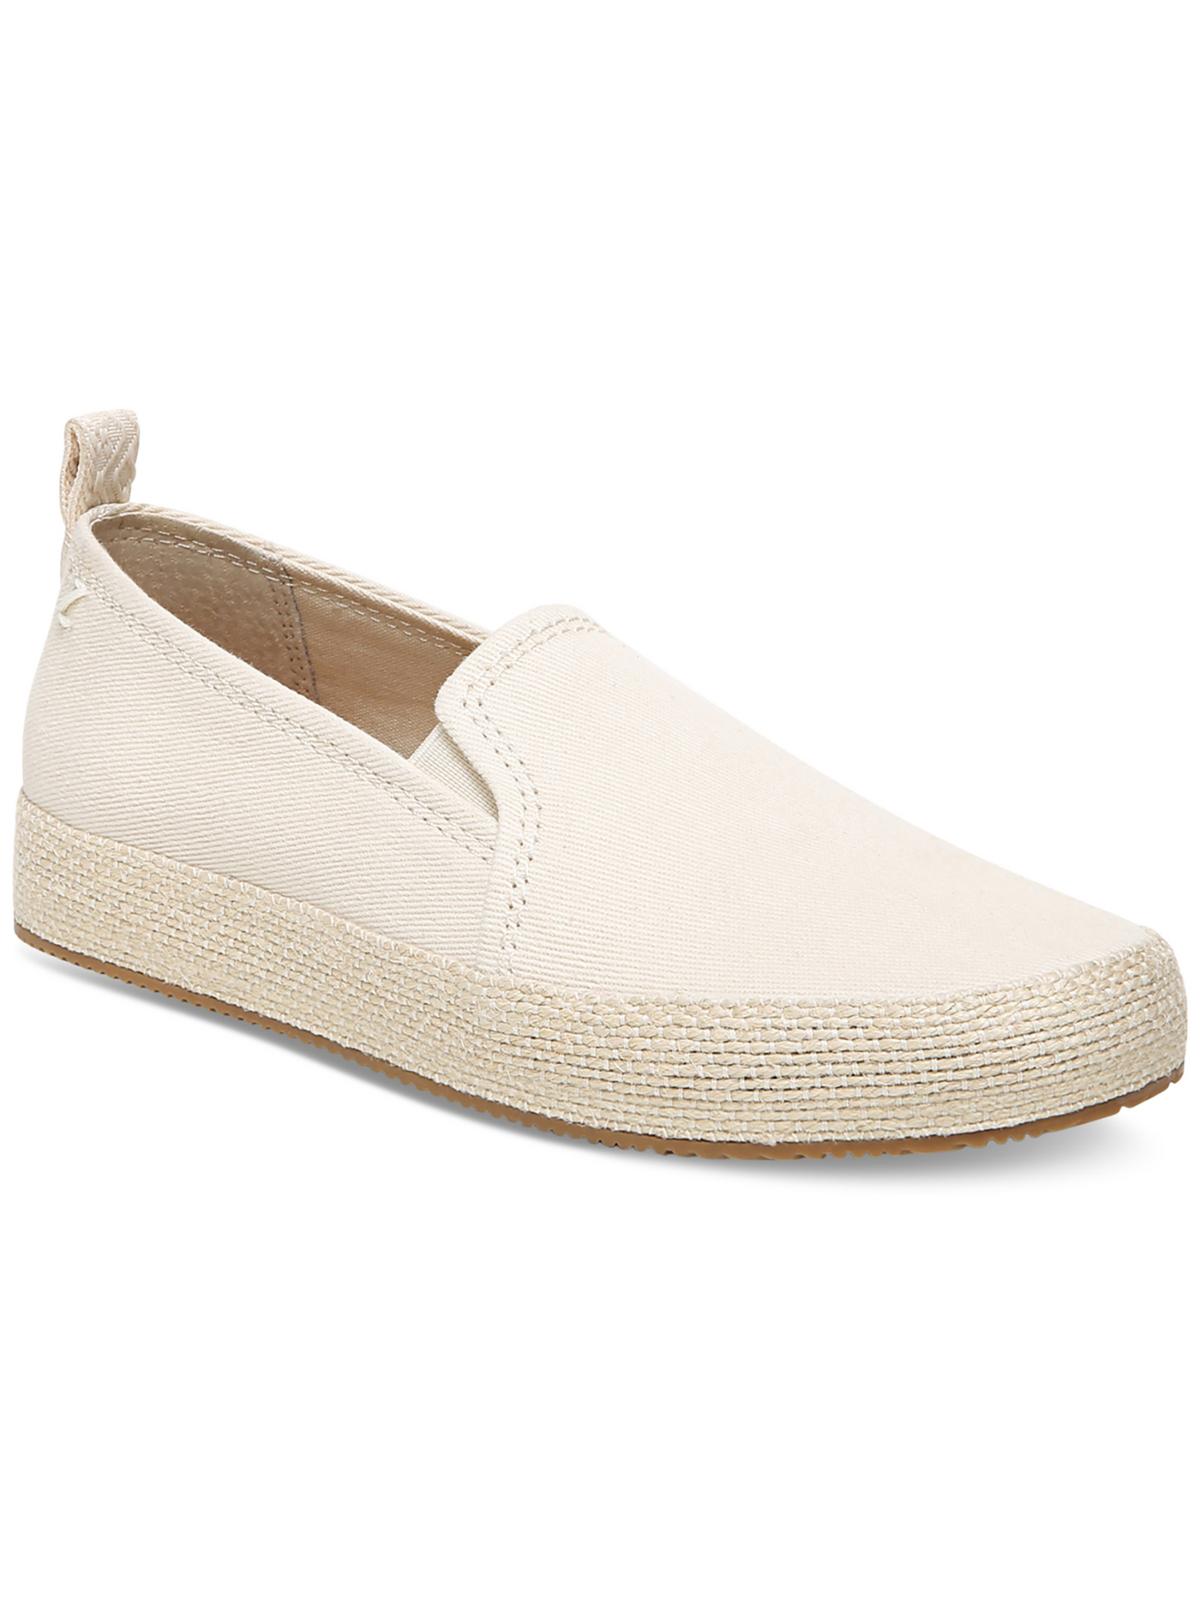 Zodiac Roma Womens Canvas Slip On Loafers In White